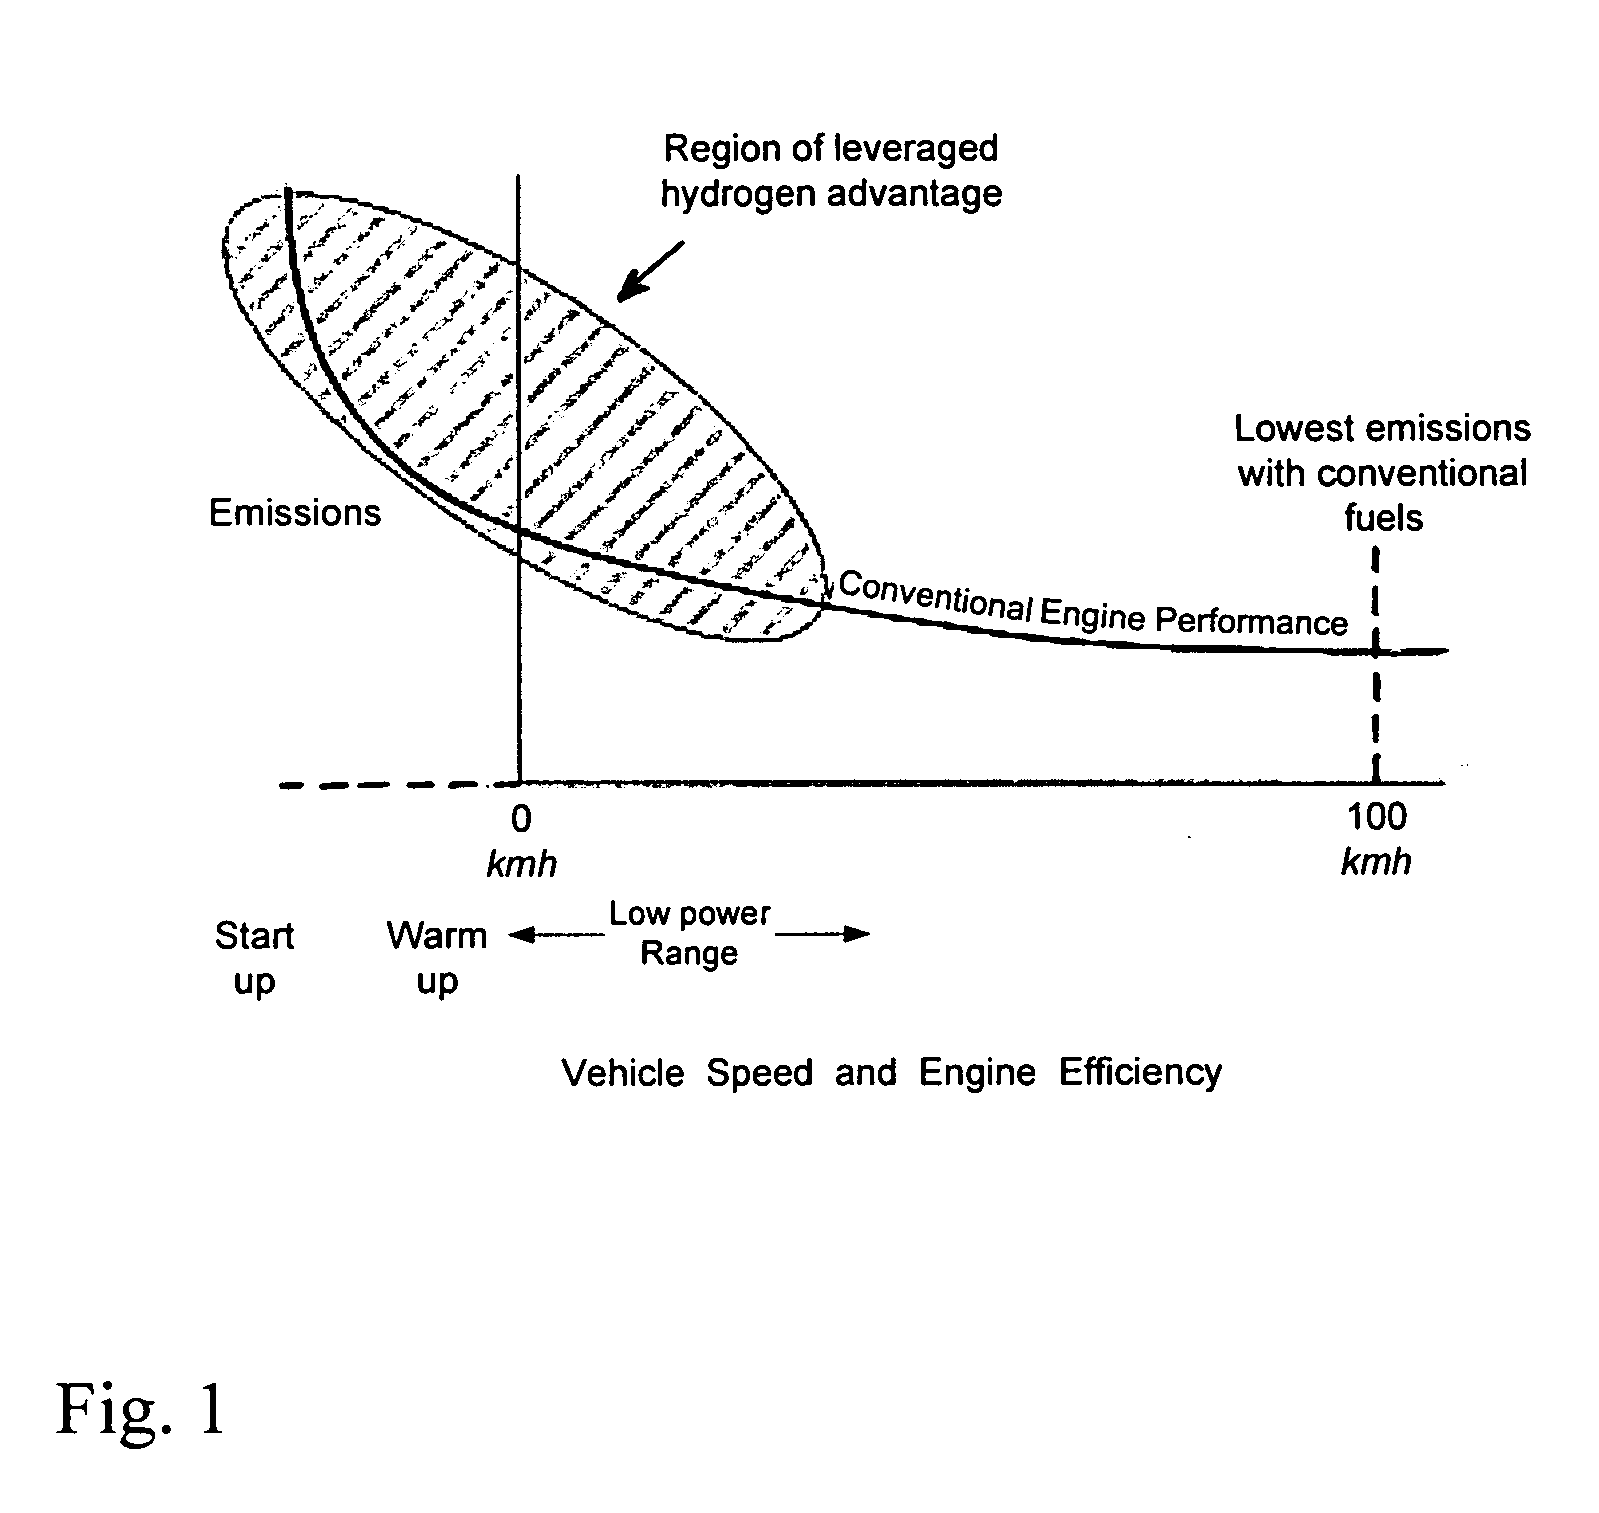 System and method for operating an internal combustion engine with hydrogen blended with conventional fossil fuels